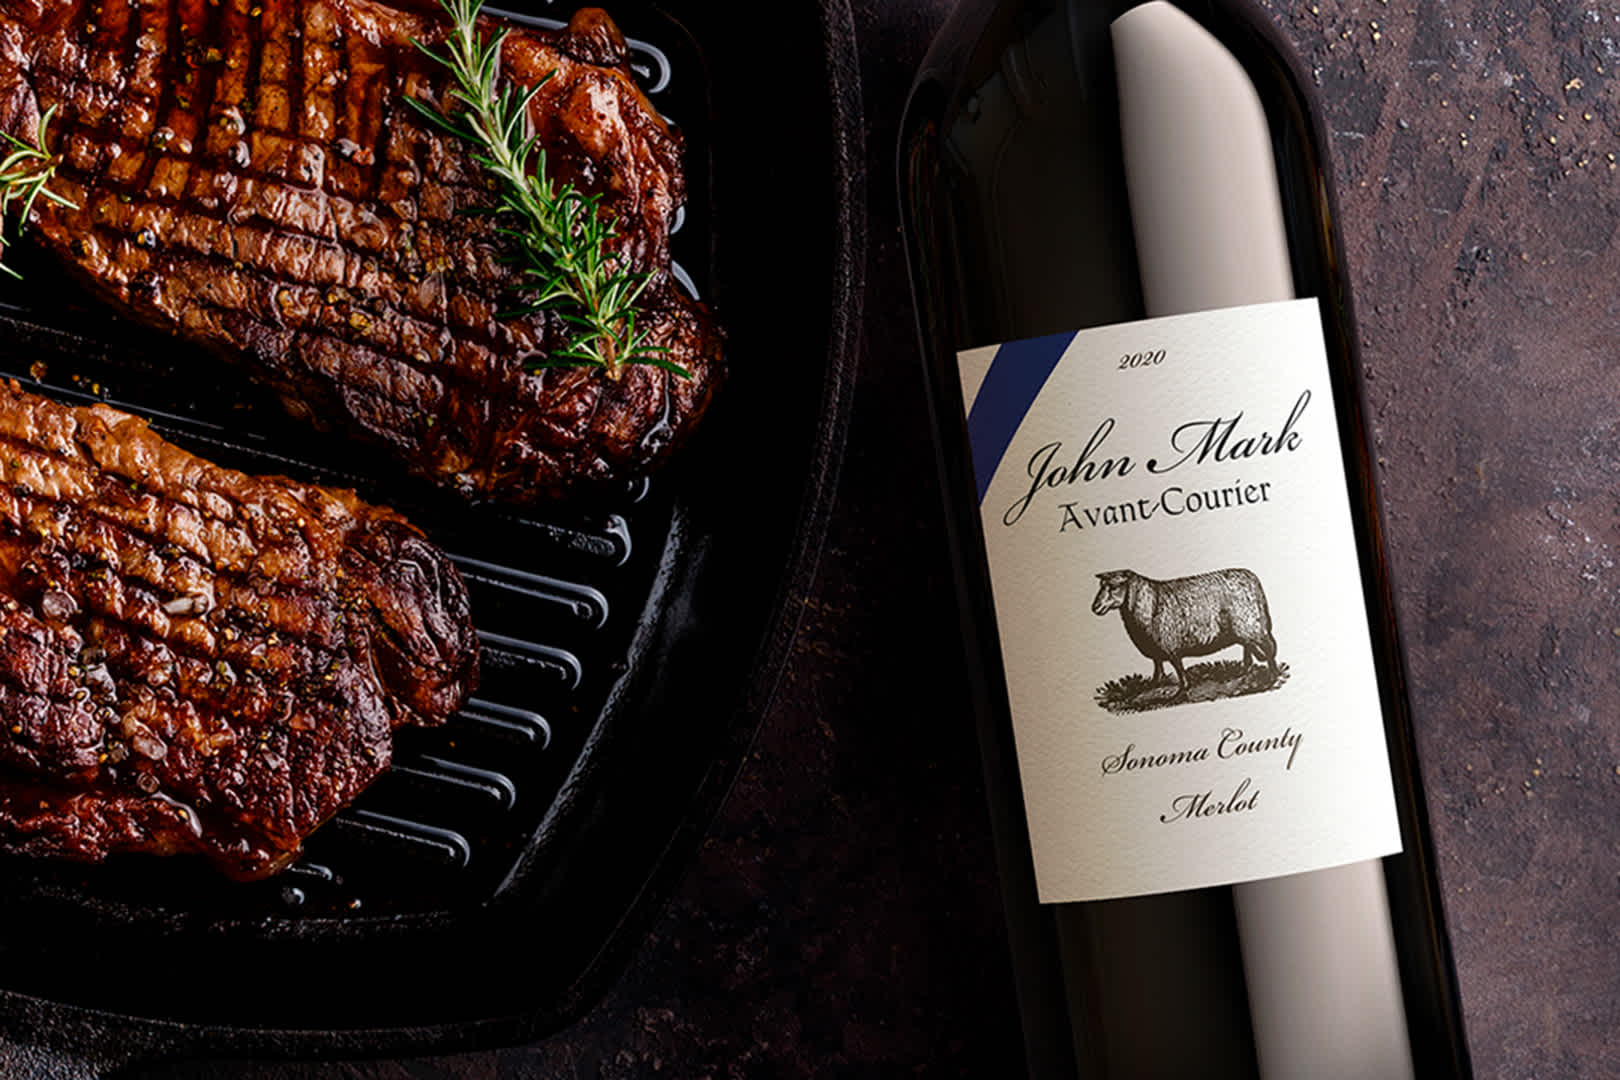 We recommend pairing grilled steak with rich red wines that have dark berry flavors and sturdy tannins, like our John Mark Avant-Courier Merlot